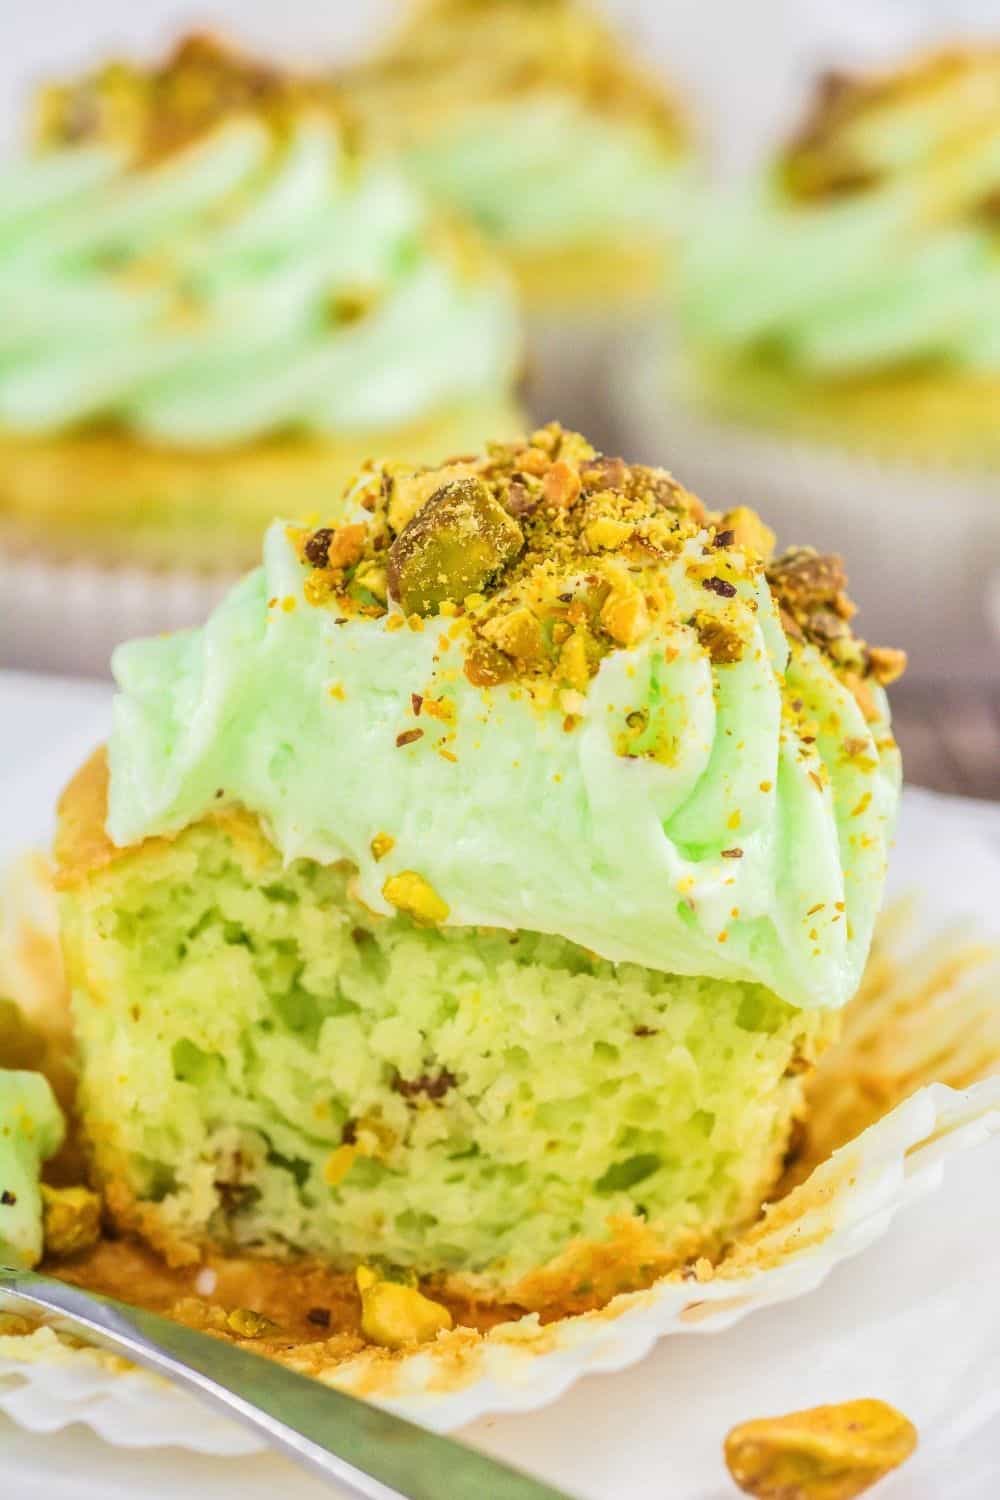 close-up view of a pistachio cupcake that's been cut in half, showing the moist interior and the creamy pistachio buttercream frosting.